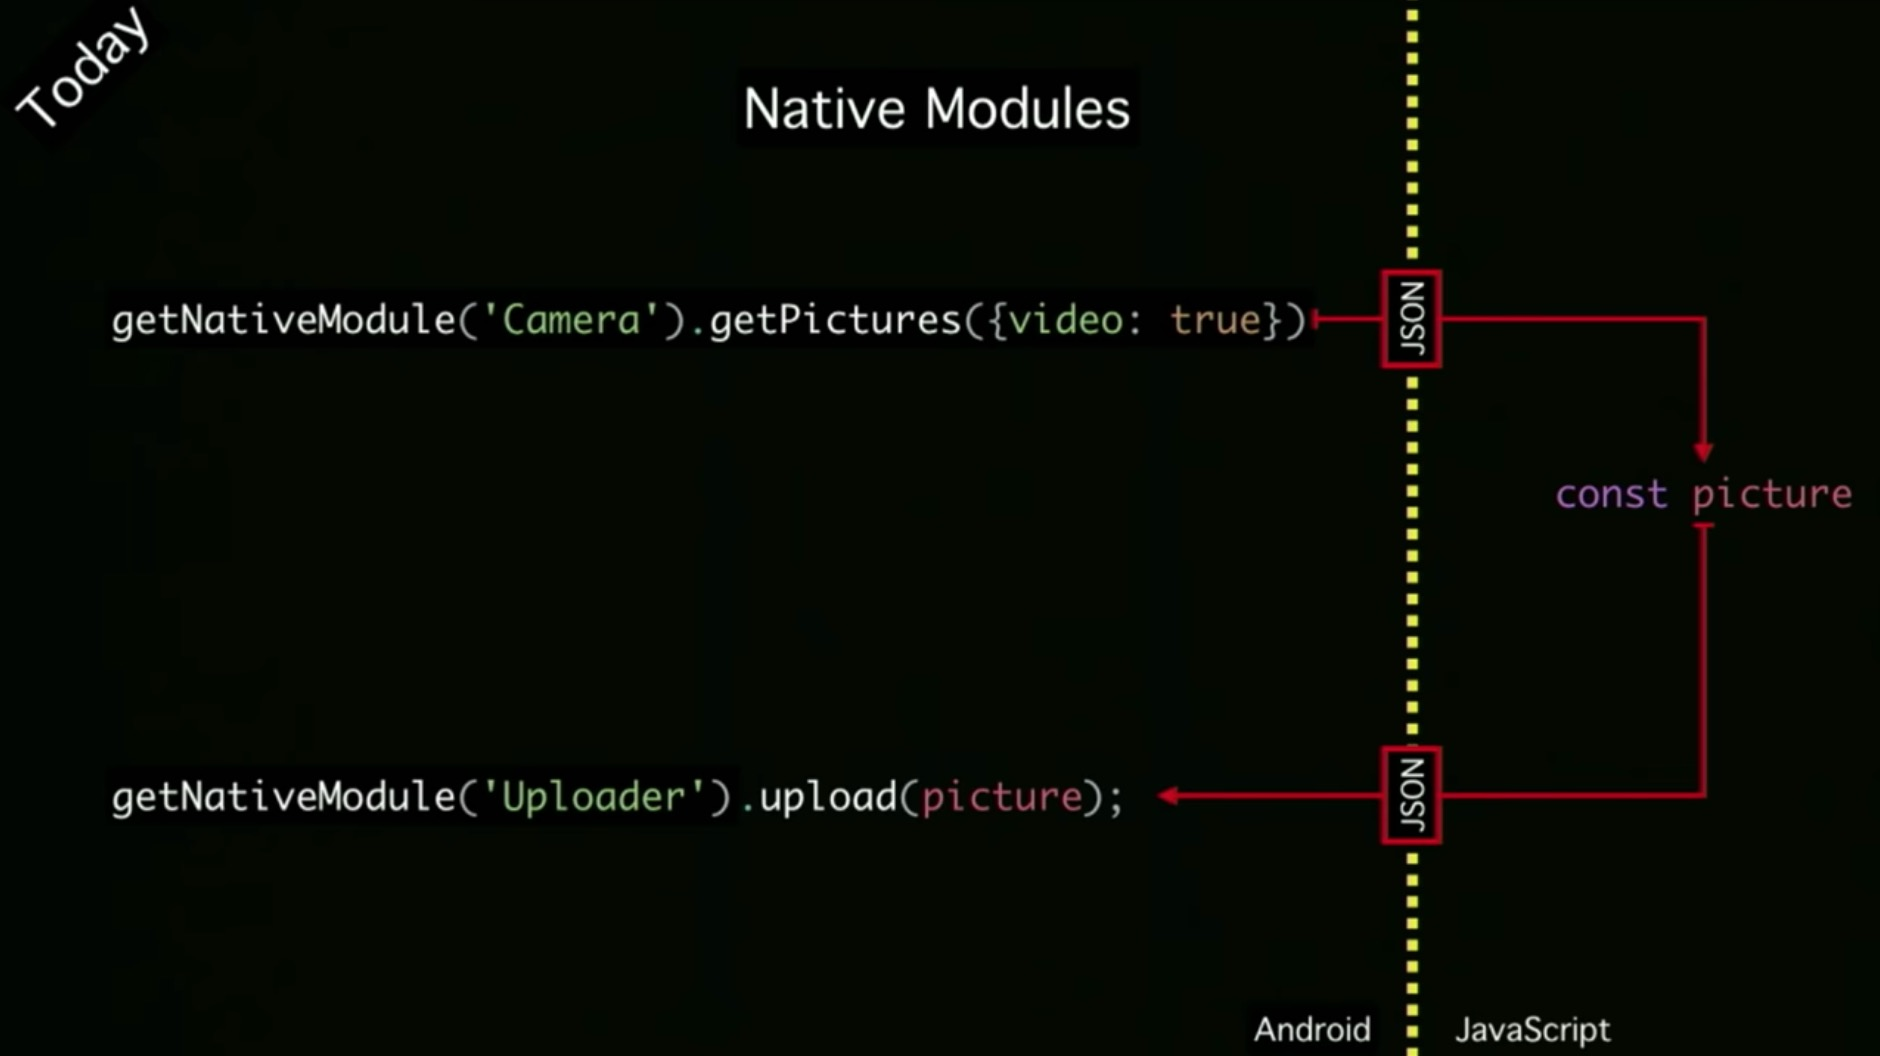 Native Modules call old